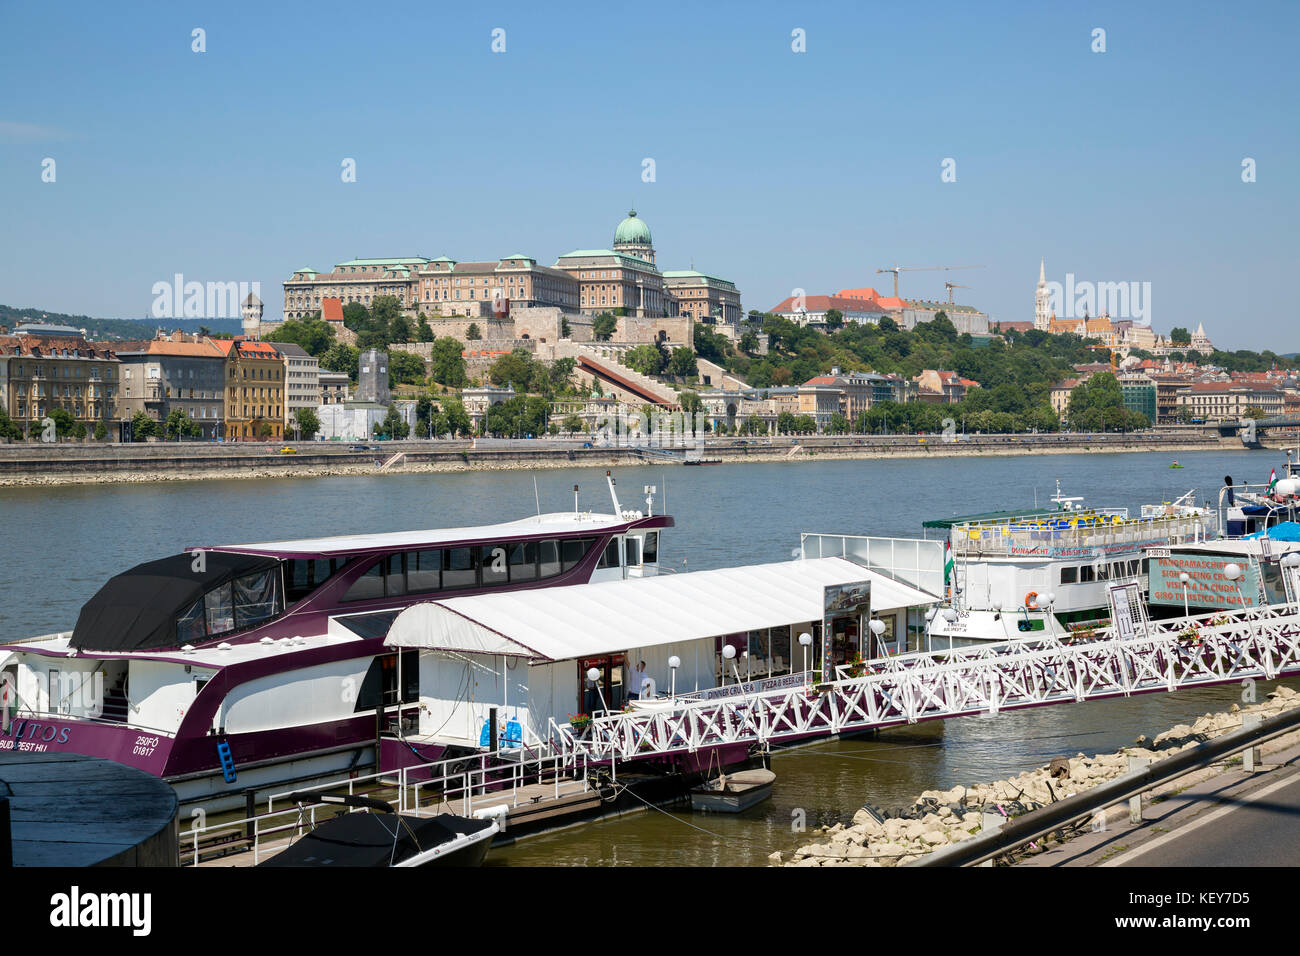 View of the Royal Buda Palace on Castle Hill across the Danube river from the Pest side. Stock Photo